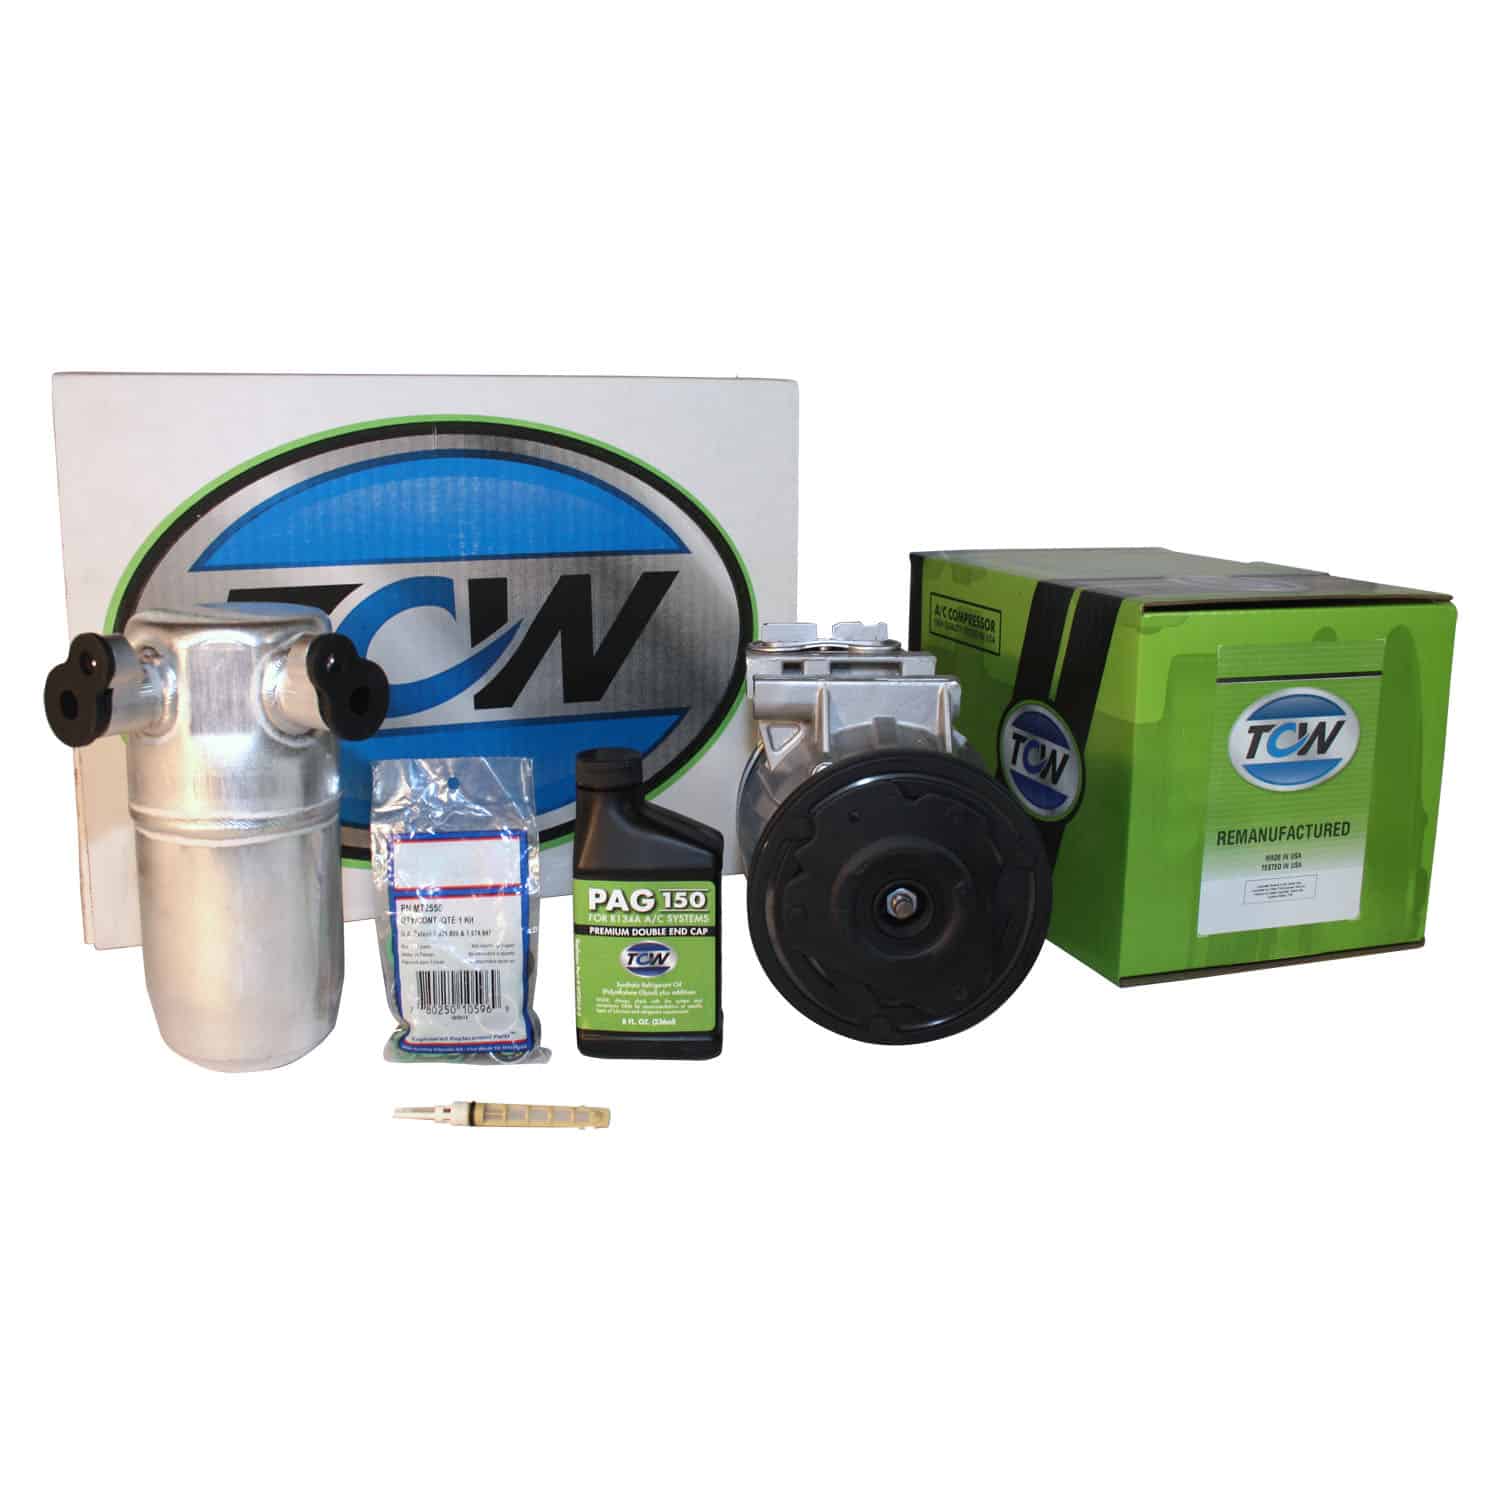 TCW Vehicle A/C Kit K1000363R Remanufactured Product Image field_60b6a13a6e67c